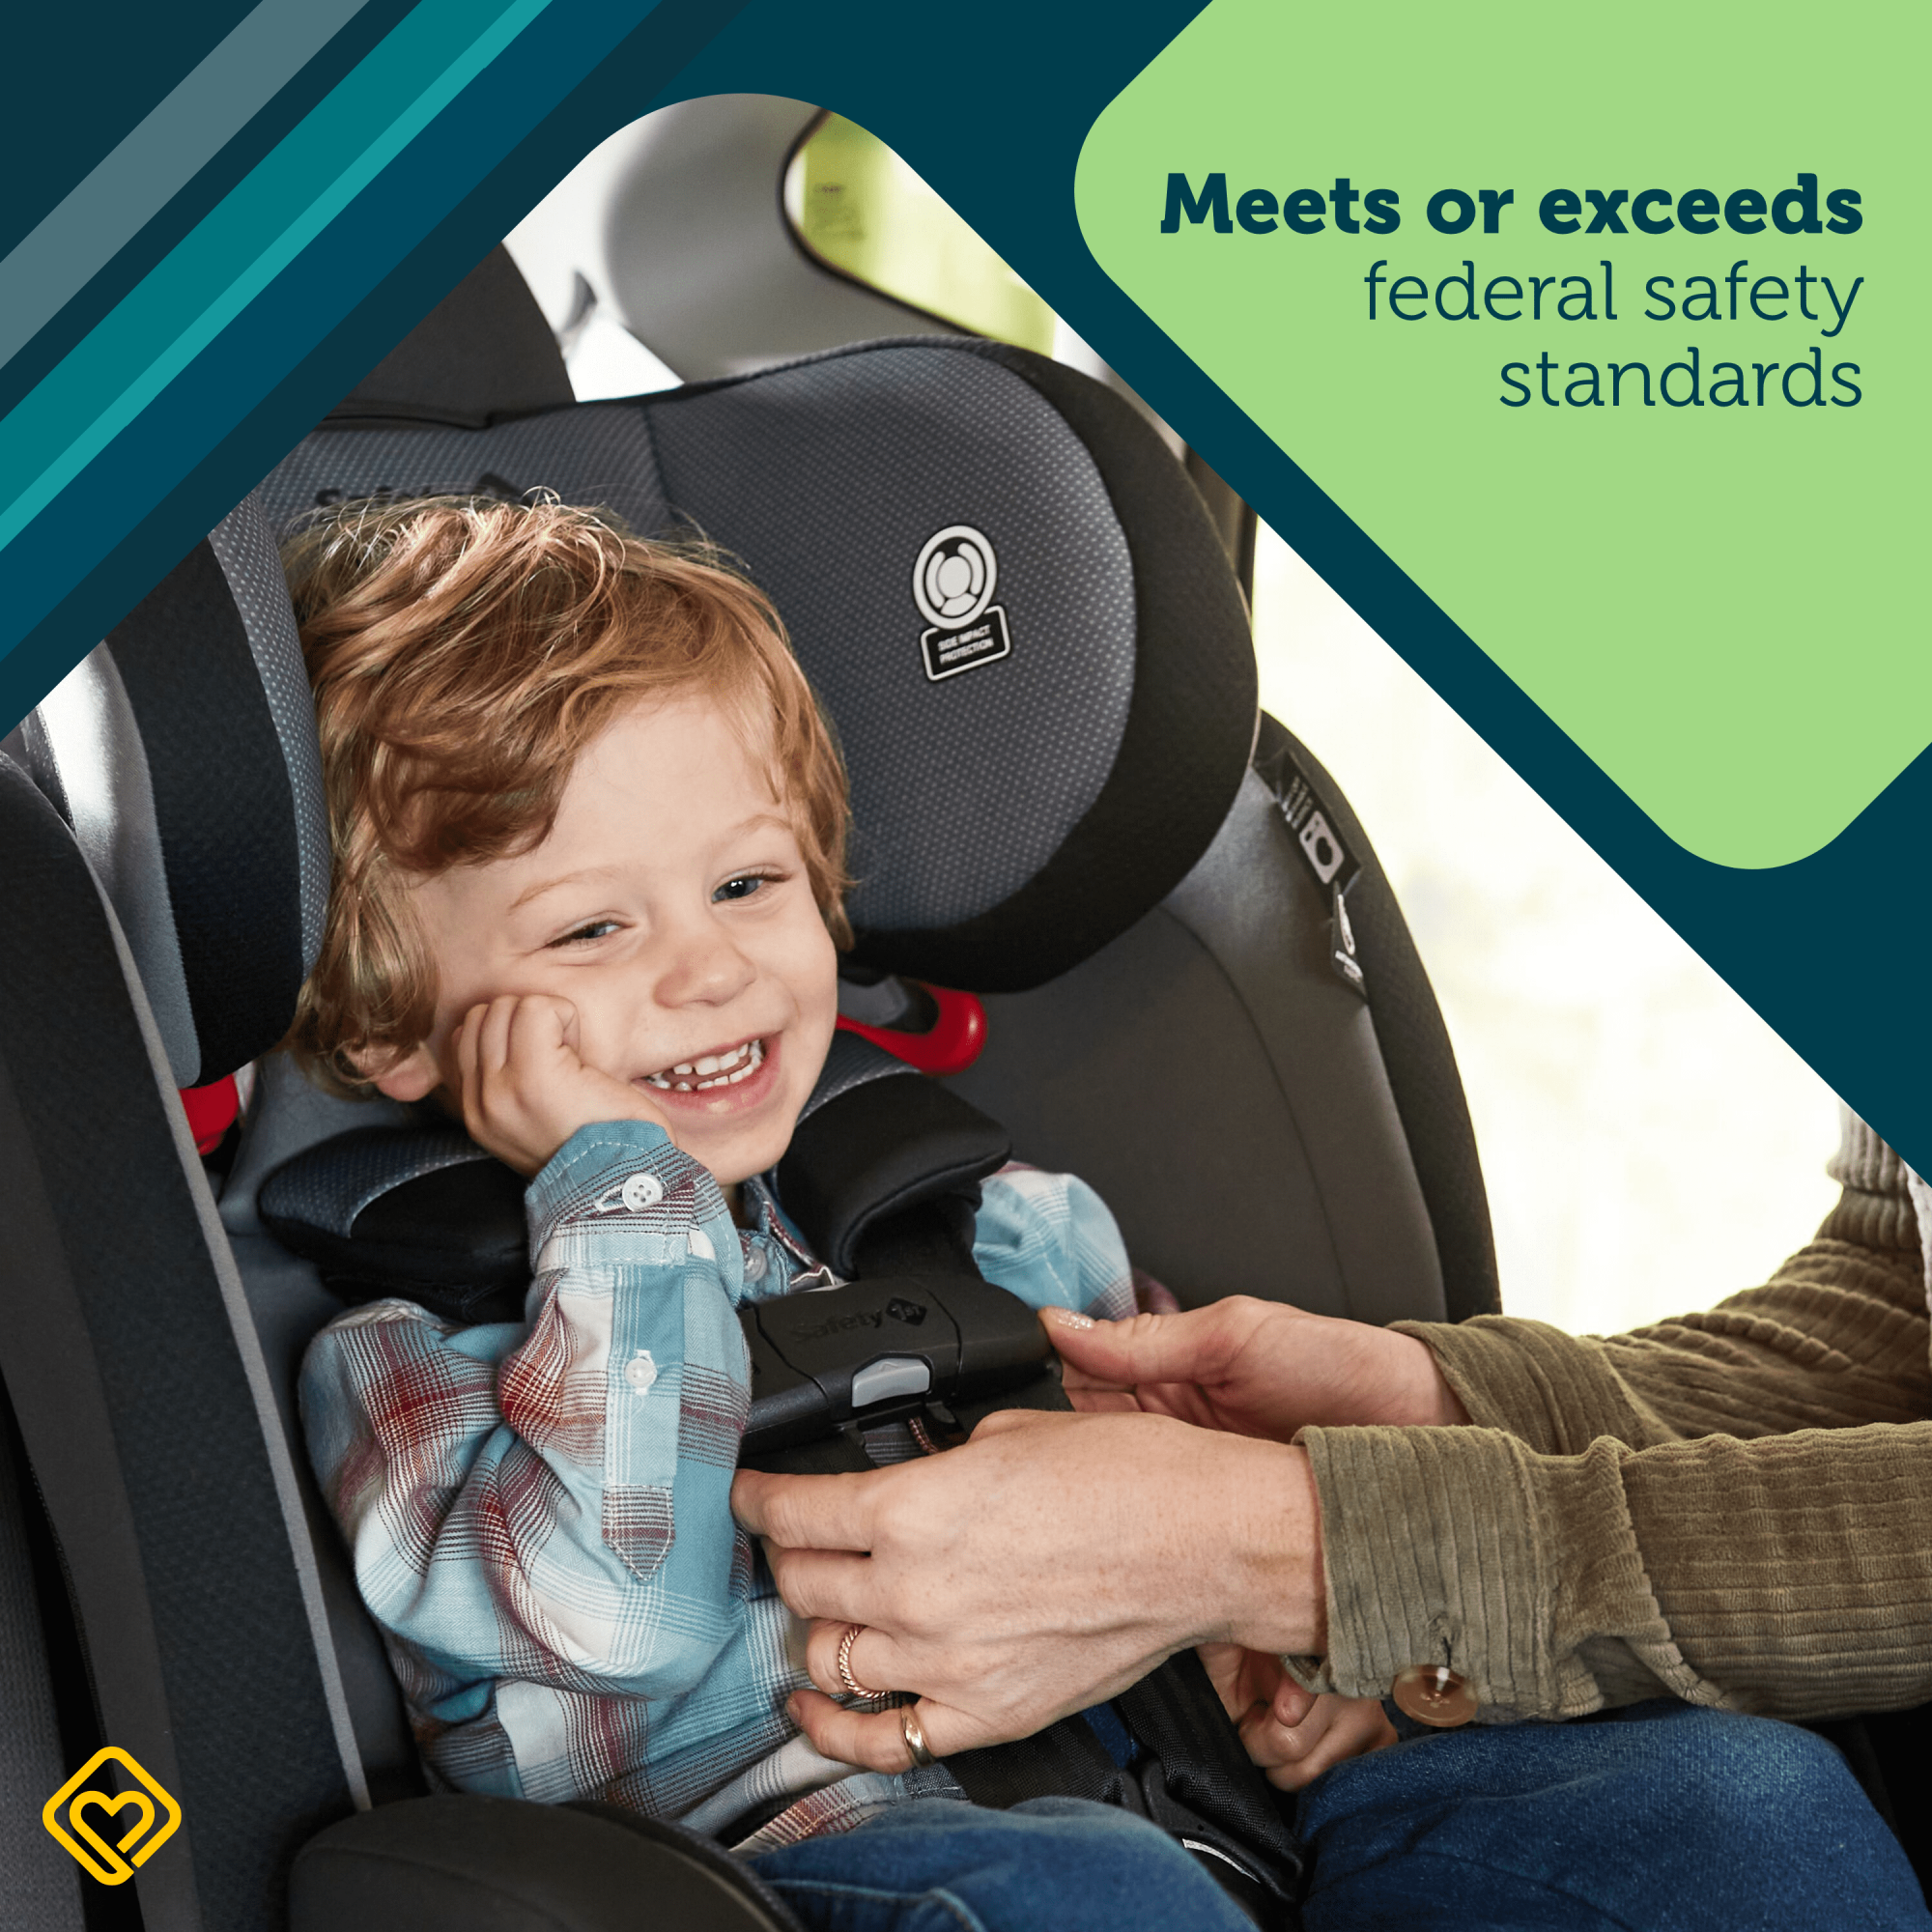 EverSlim 4-Mode All-in-One Convertible Car Seat - meets or exceeds federal safety standards